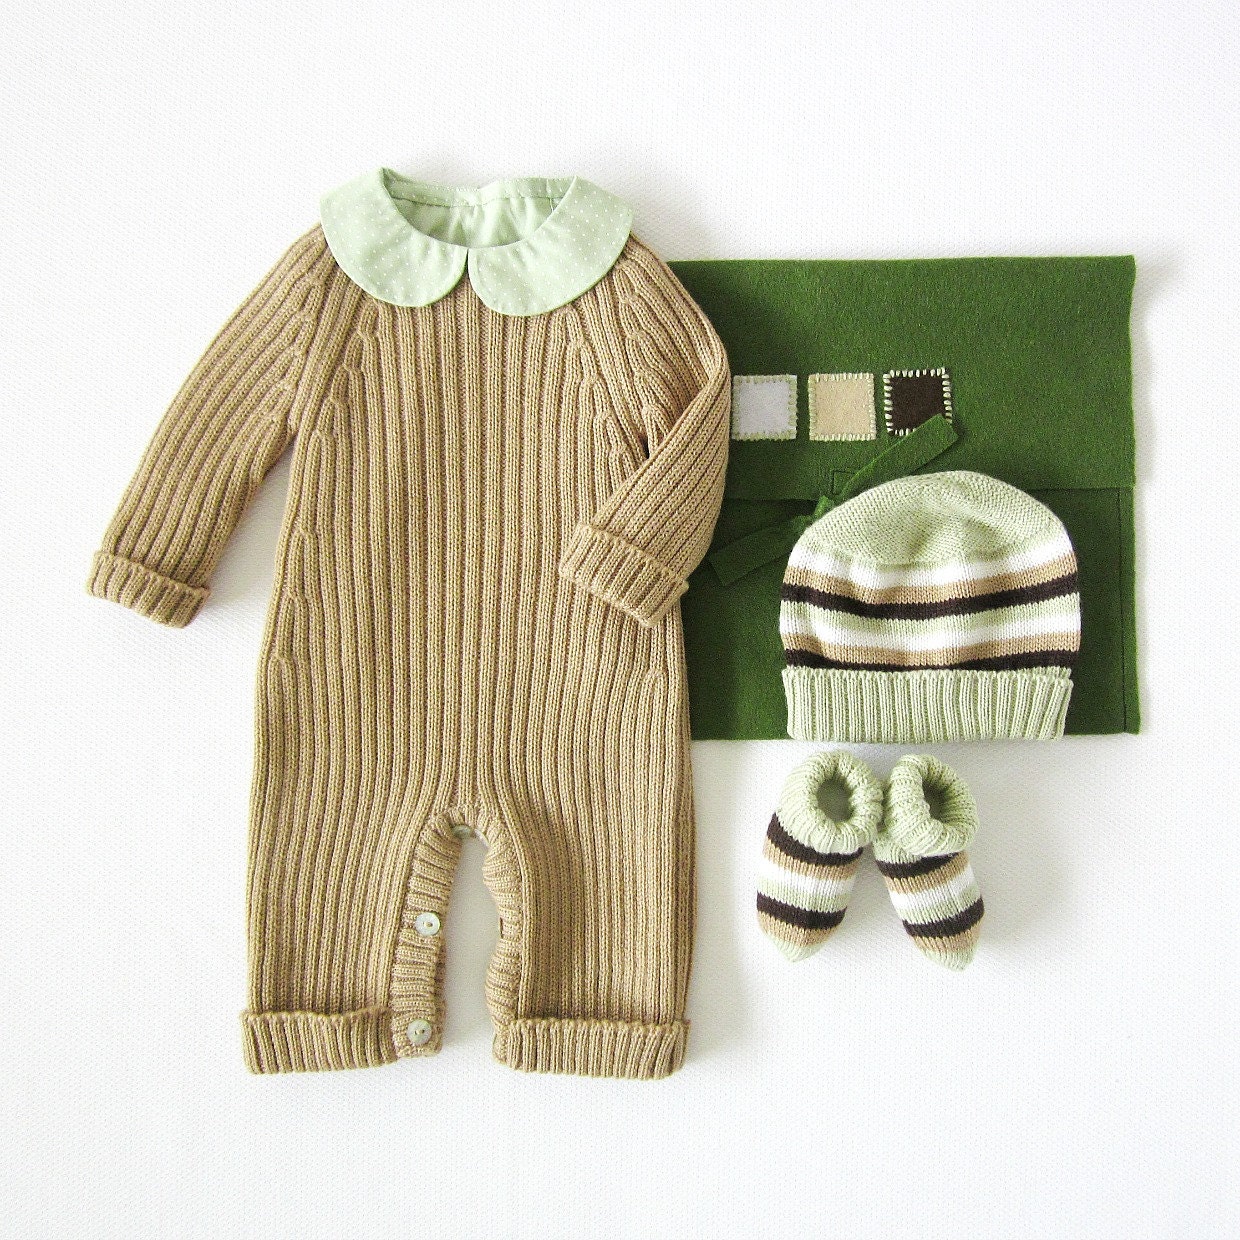 Knitted ribbed jumpsuit, hat and socks, in camel. 100% wool. Newborn. - tenderblue